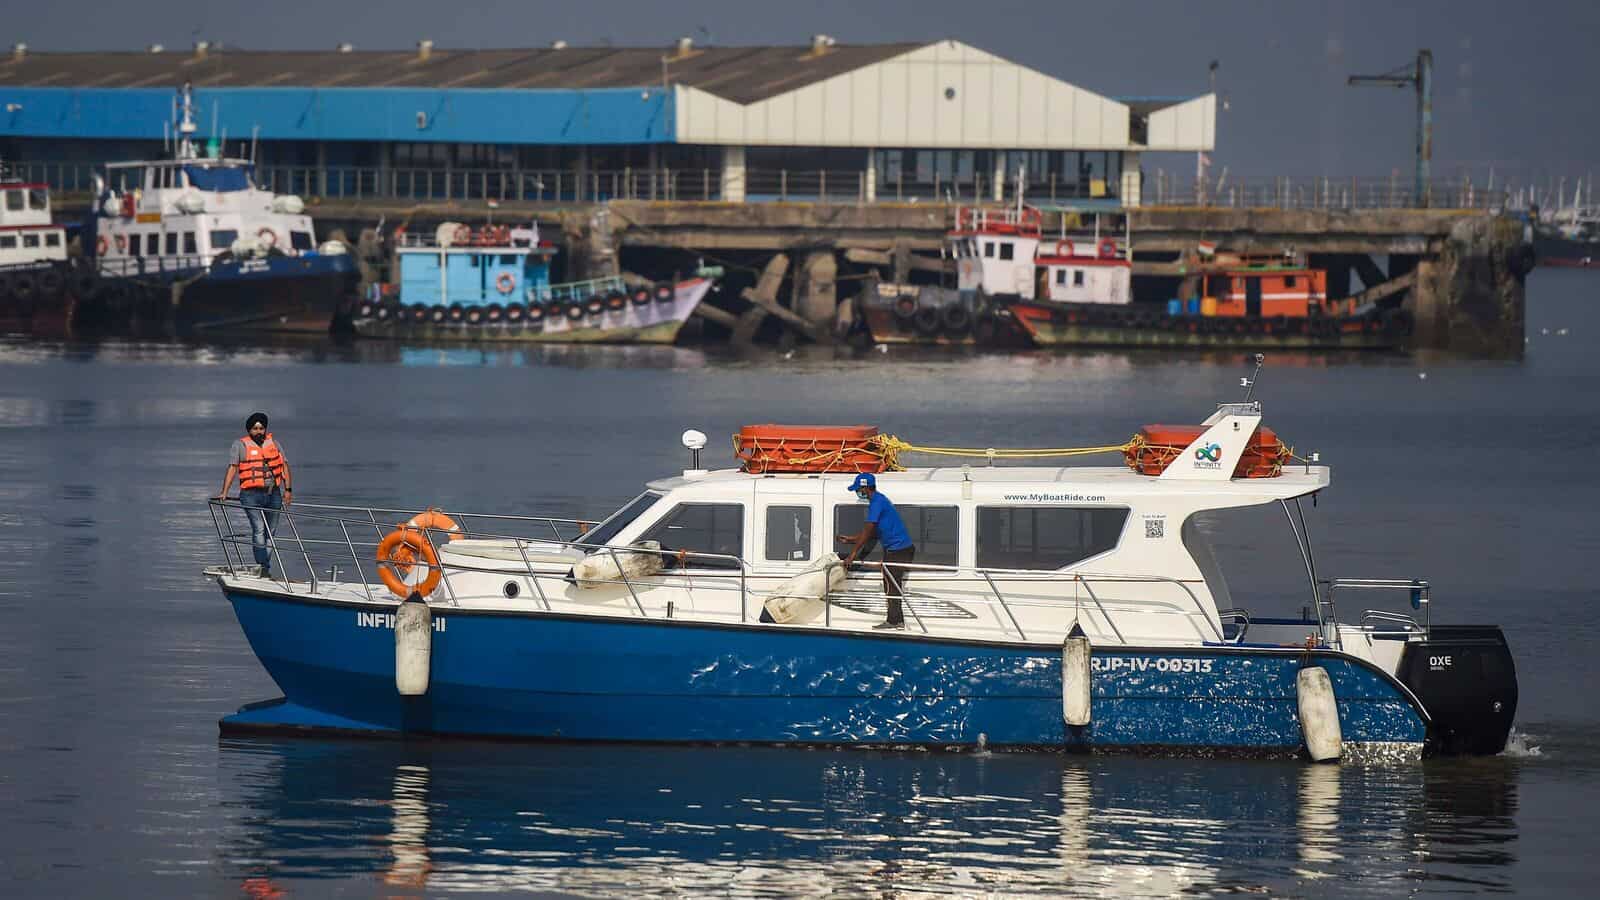 India's first water taxi service inaugurated in Mumbai